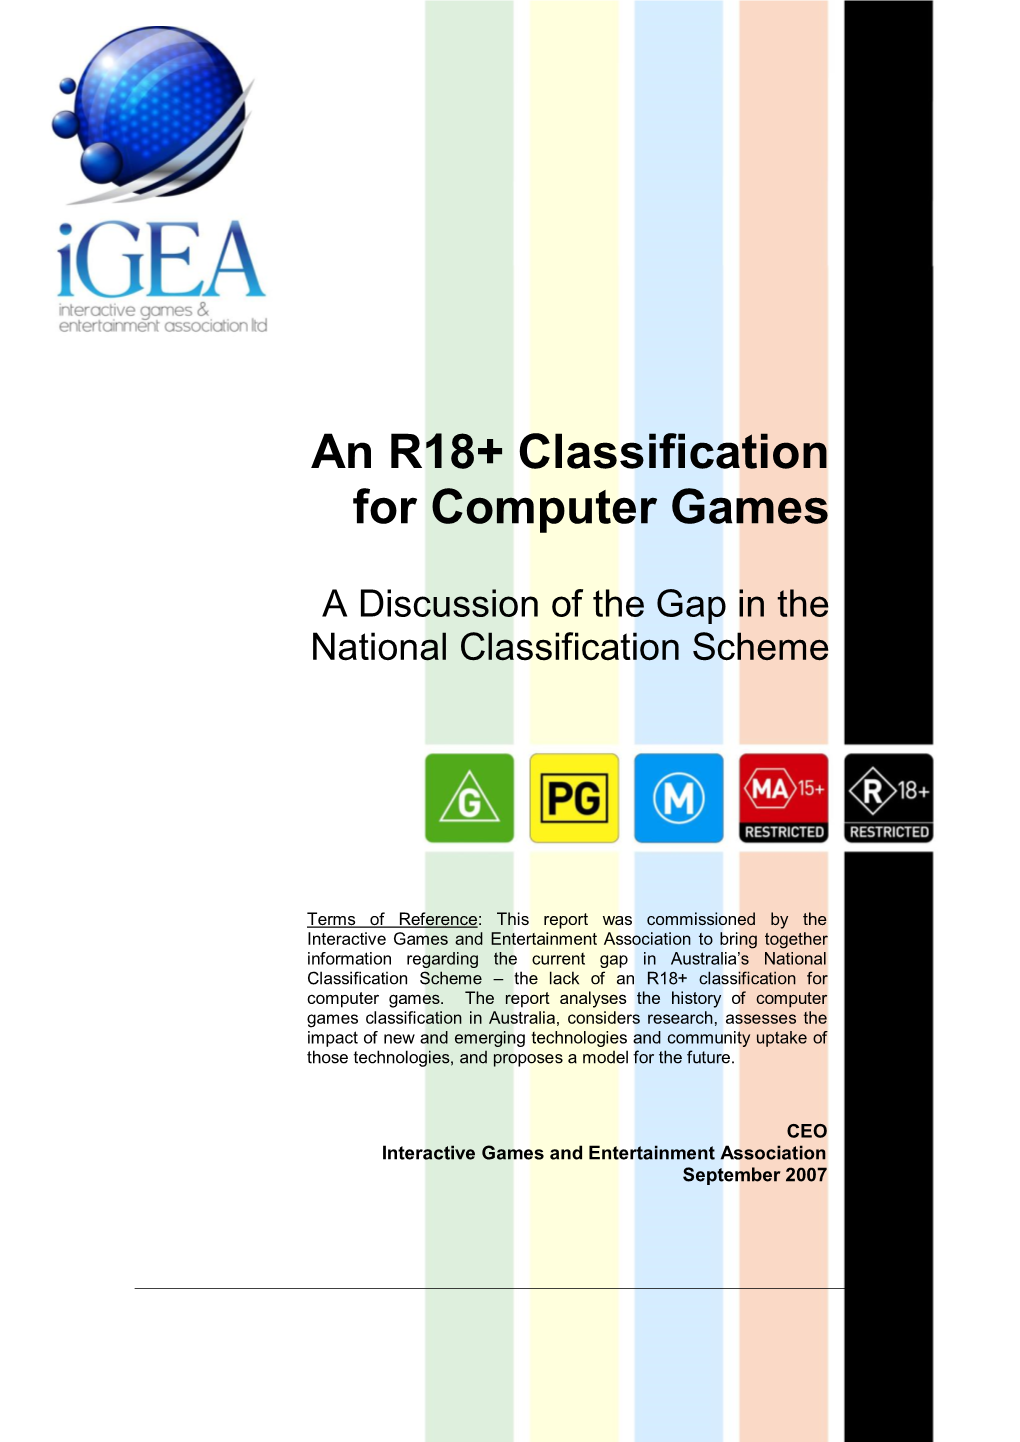 An R18+ Classification for Computer Games